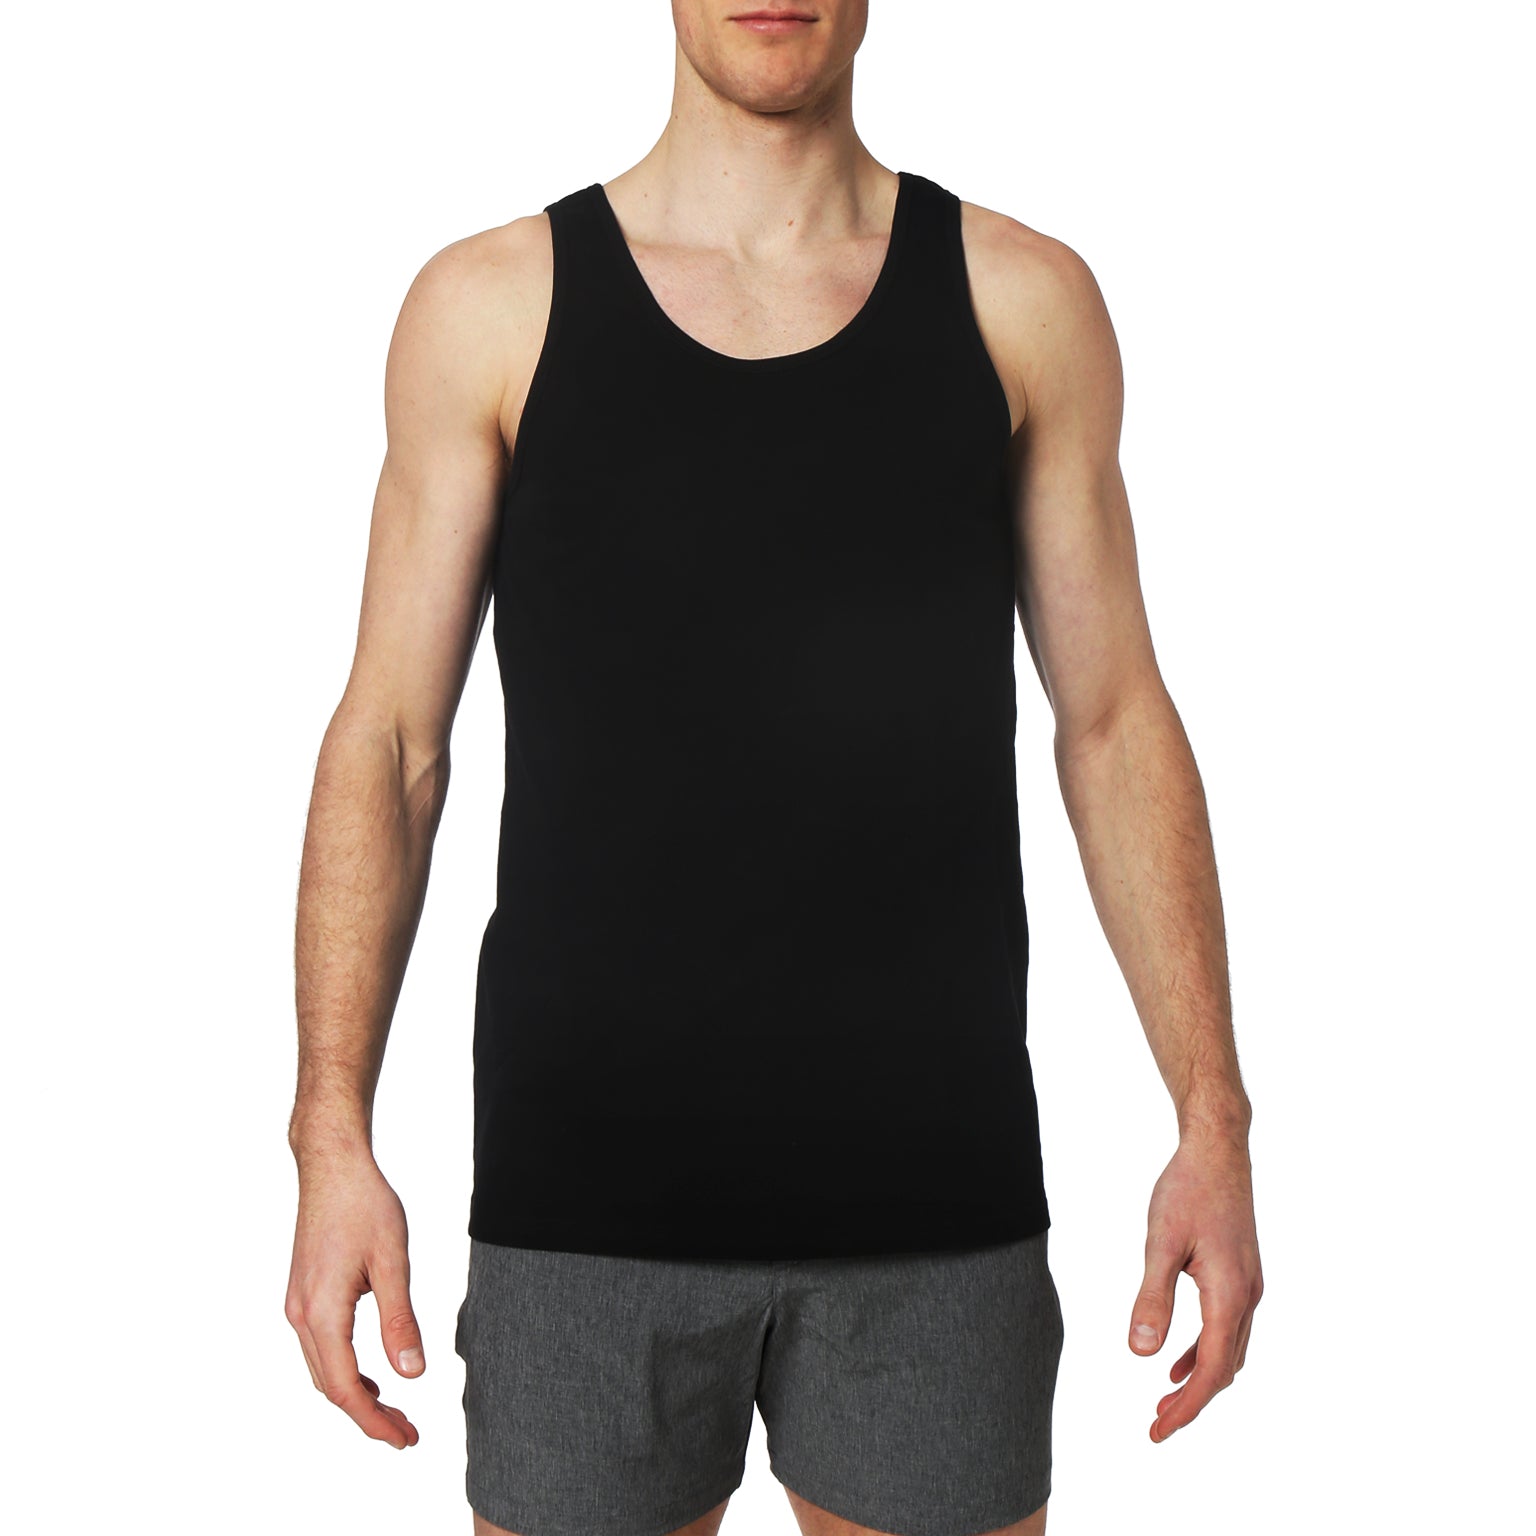 ACTIONWEAR- Black Solid Essential Cotton Tank Top